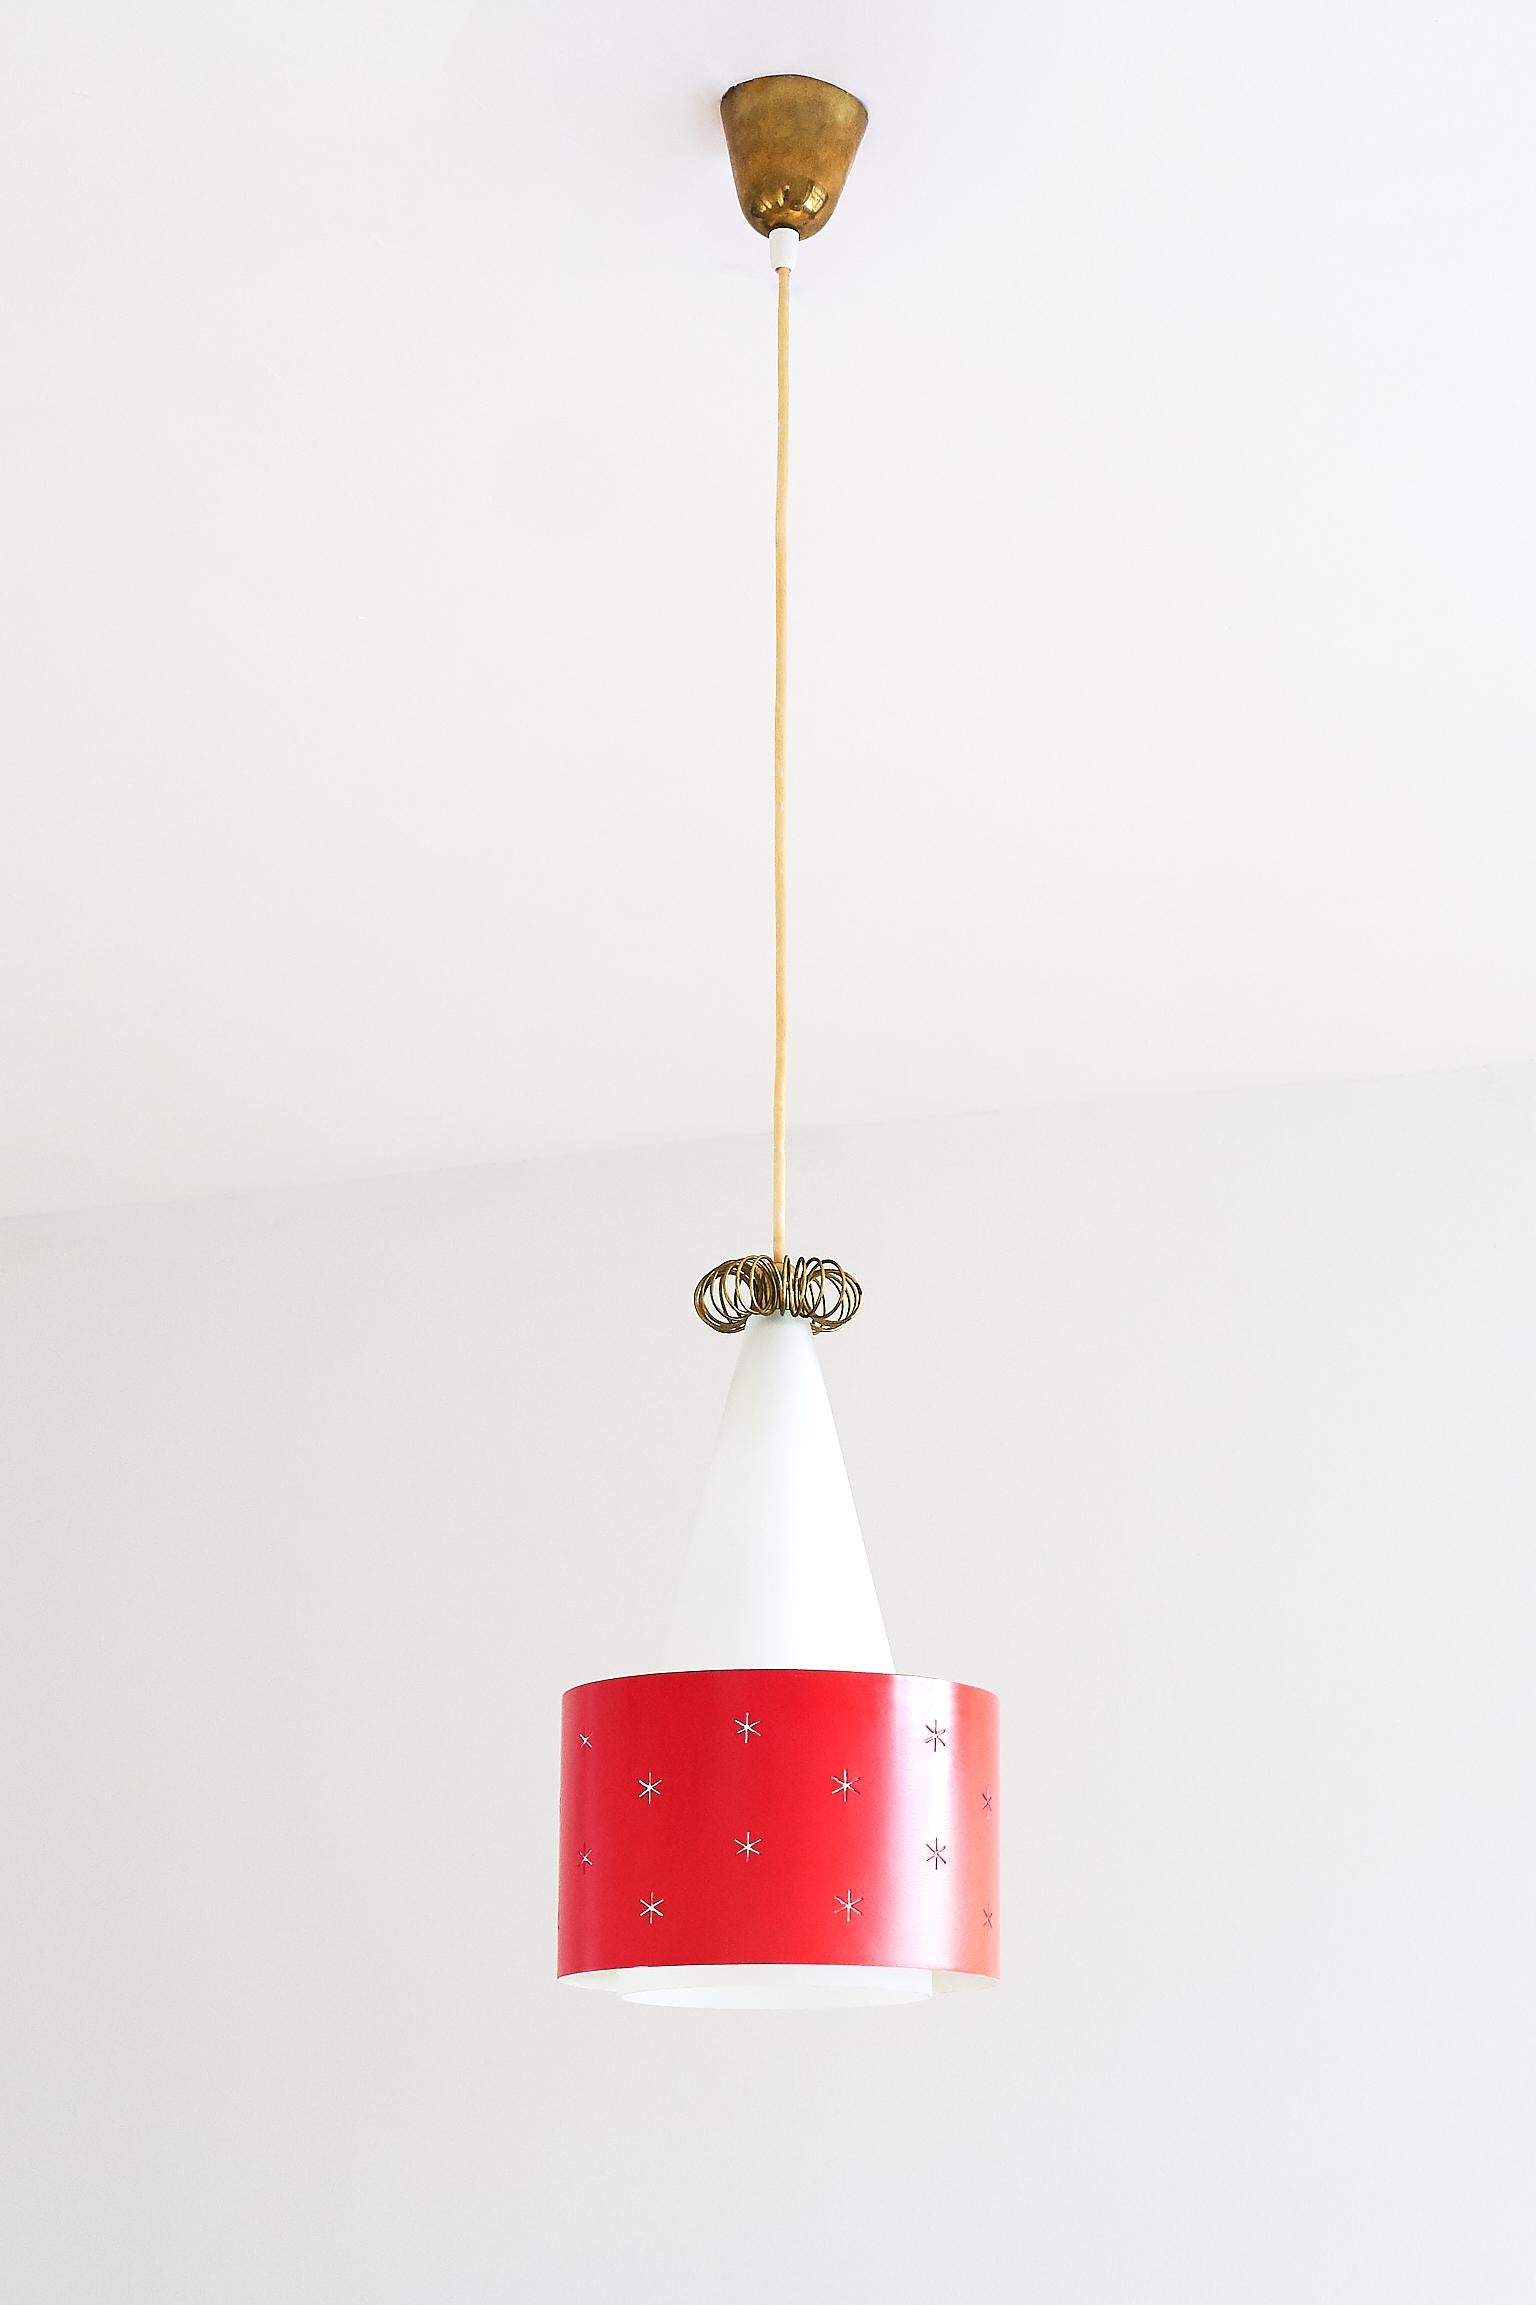 A rare red pendant designed by Paavo Tynell and produced by Idman in 1955. The model number is K2-10/ N-9241. The conical shade is made of a white matte glass, resulting in a soft and diffused light. The red painted metal ring appears to float